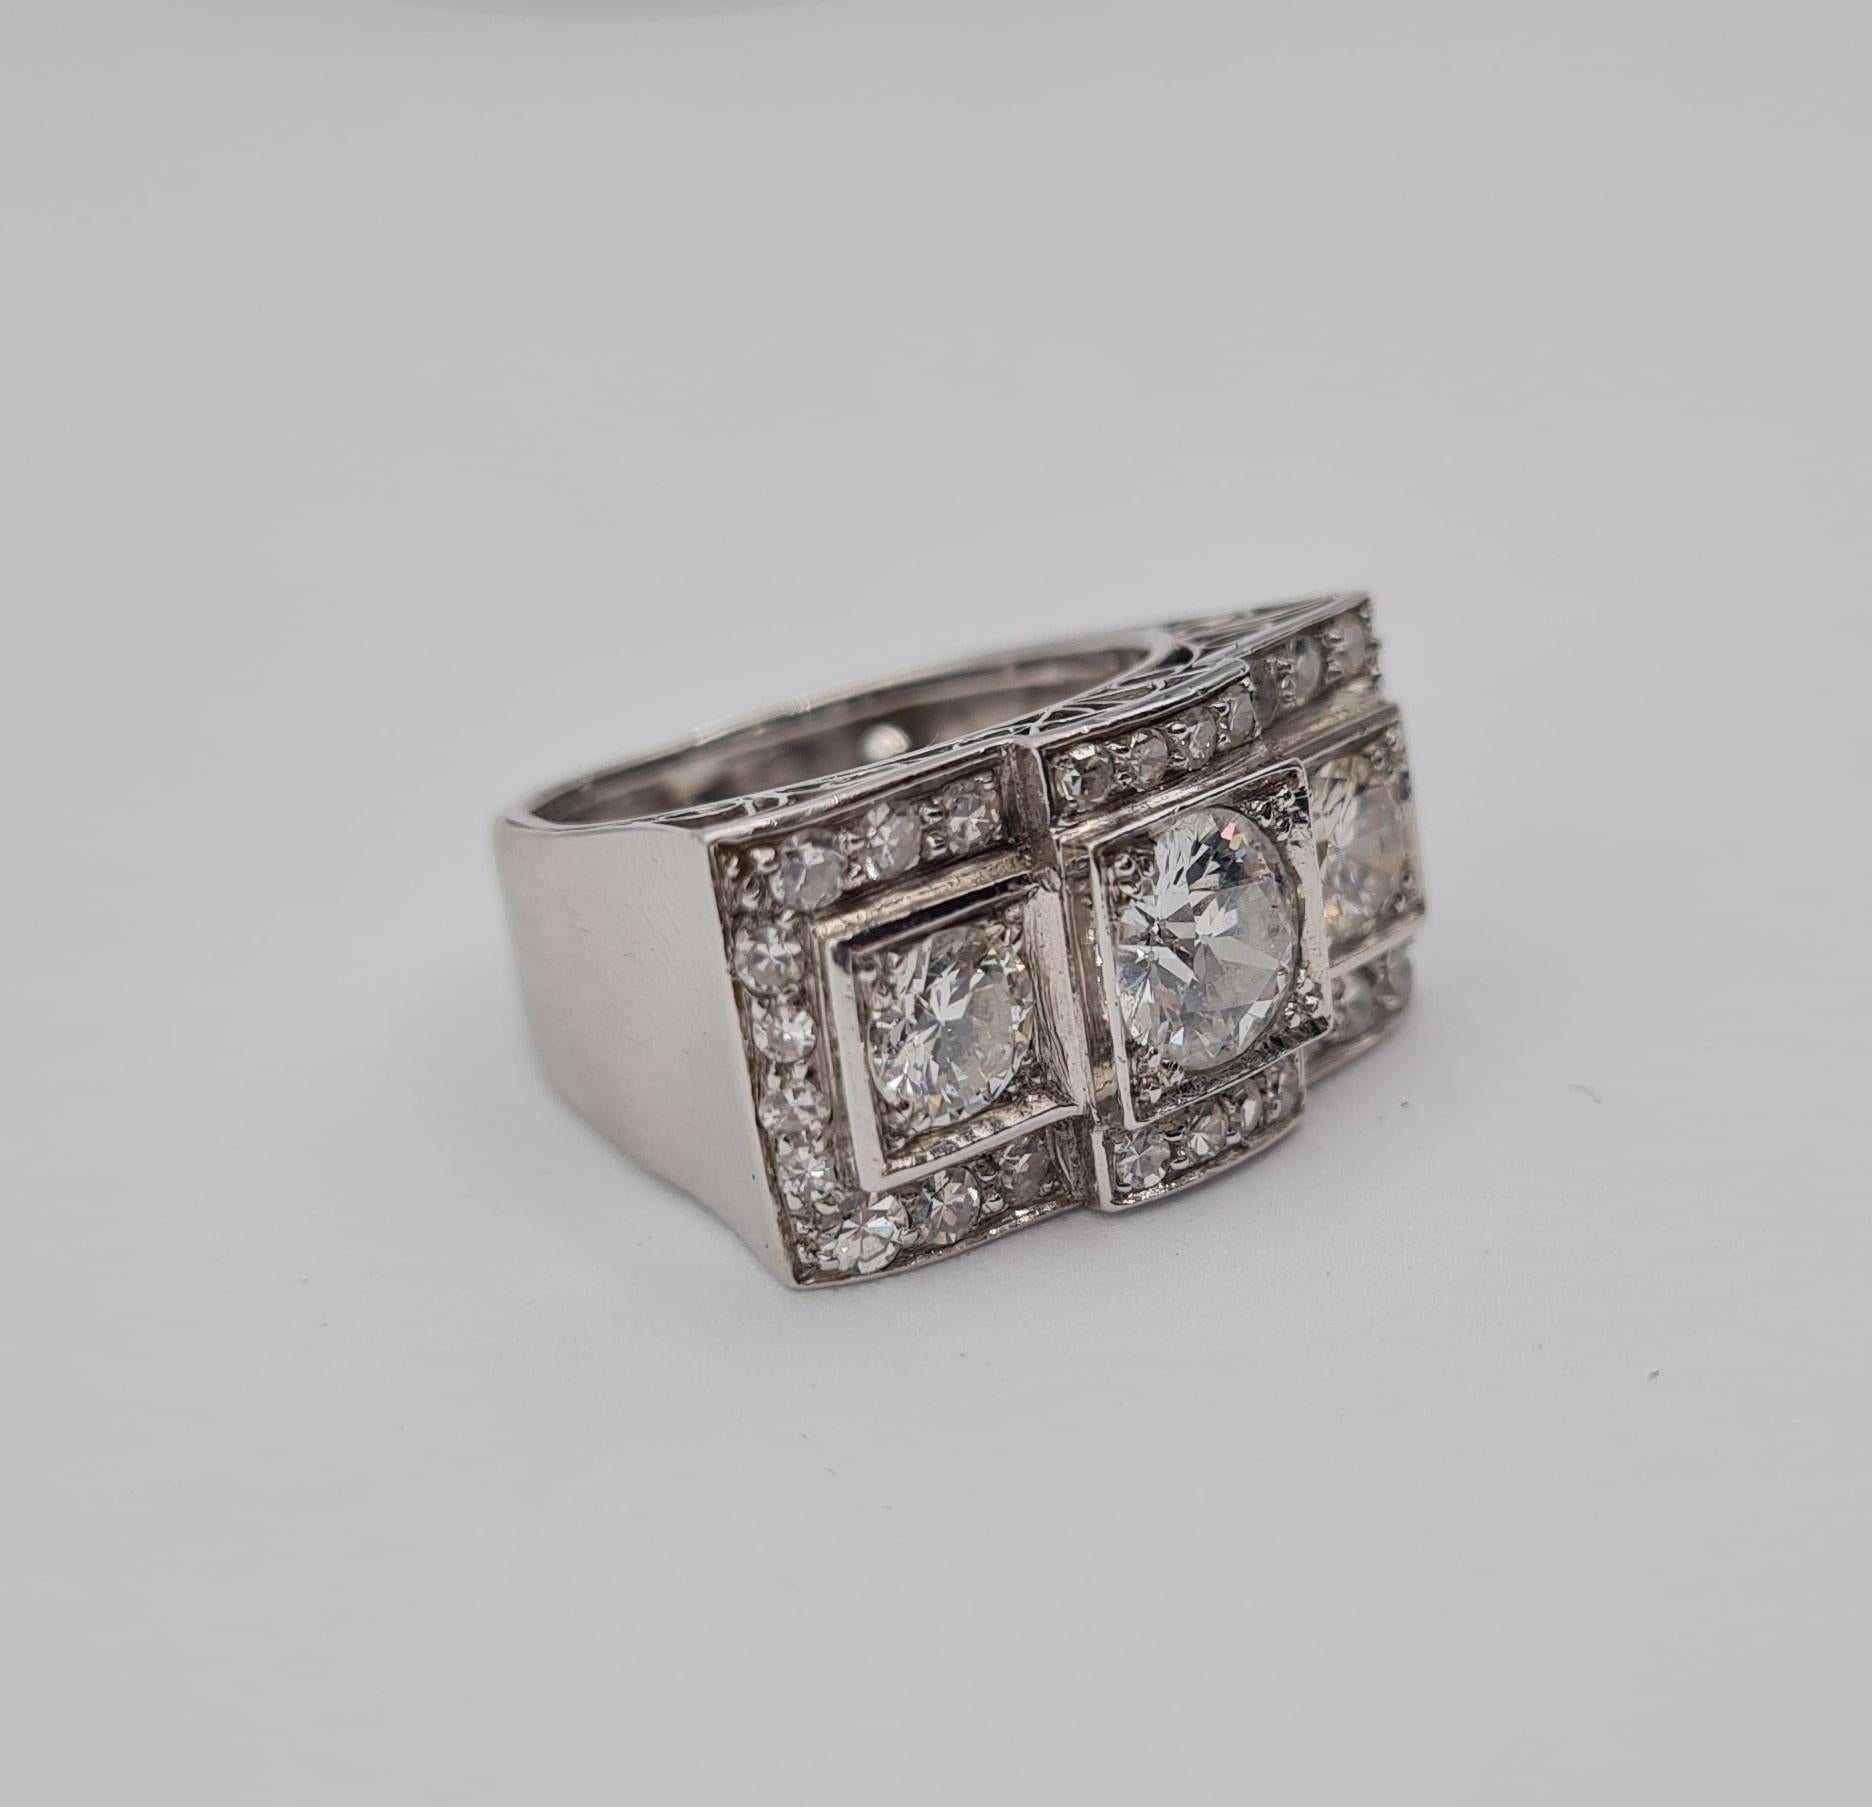 Old european 3 stones round brilliant cut diamond ring set in an Art Decò style design with other 28 diamonds for a total weight carat of 2.32 Ct.
The three stone are weight approximatly 1.66 Carat.
The ring was handmade by italian Goldsmith during